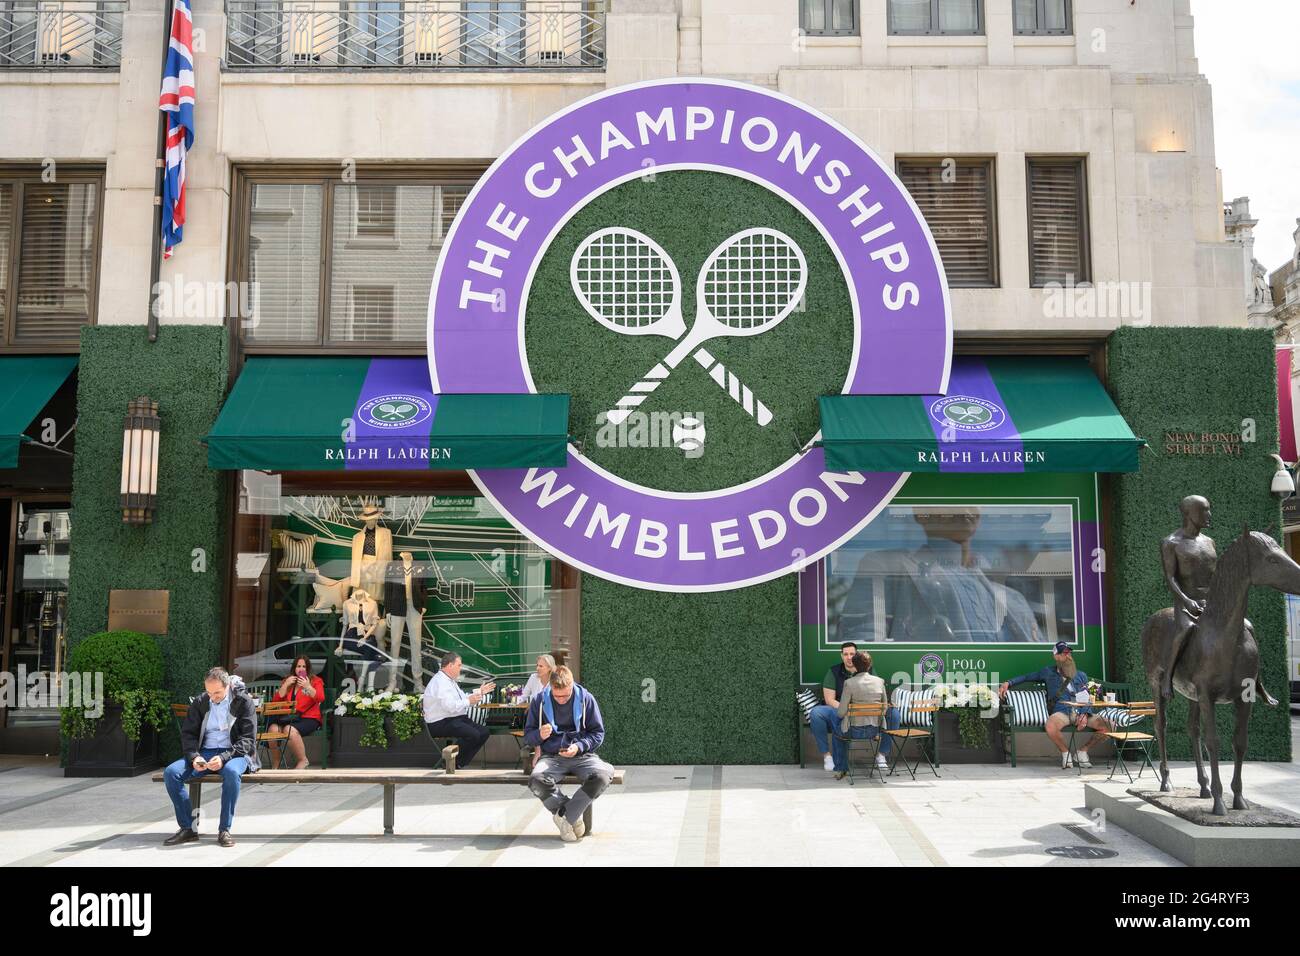 New Bond Street, London, UK. 23 June 2021. The 2021 Wimbledon Championships  are heavily promoted at Ralph Lauren store in central London's fashionable New  Bond Street. The grand slam championships are due